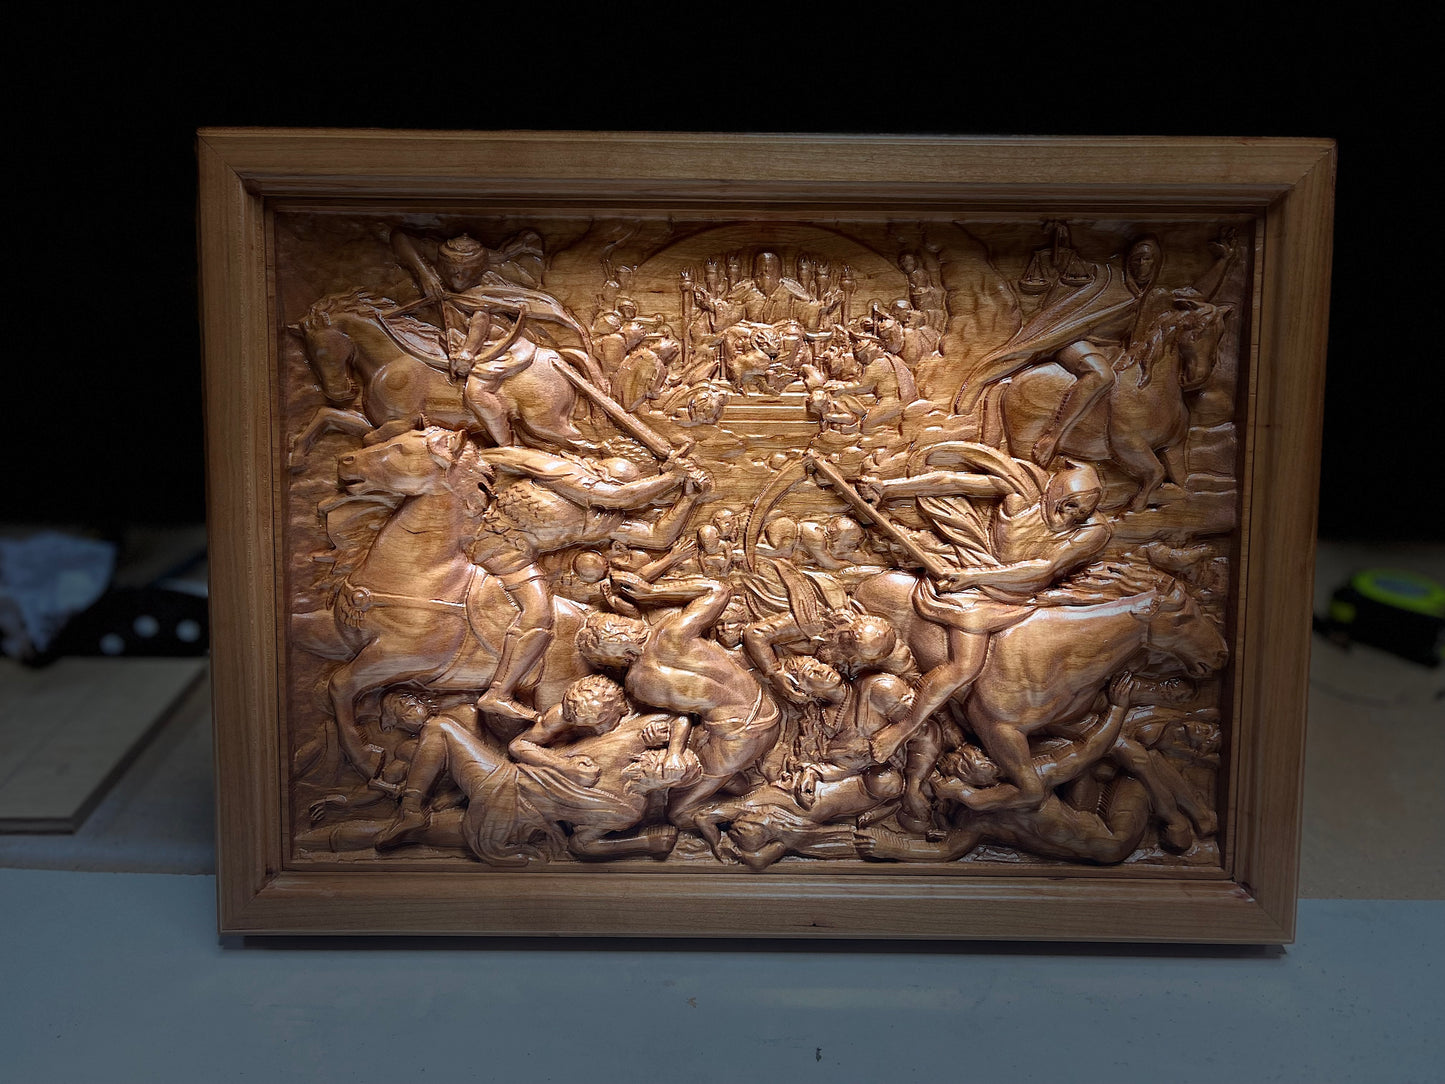 3D carving of Four Horseman of The Apocalypse